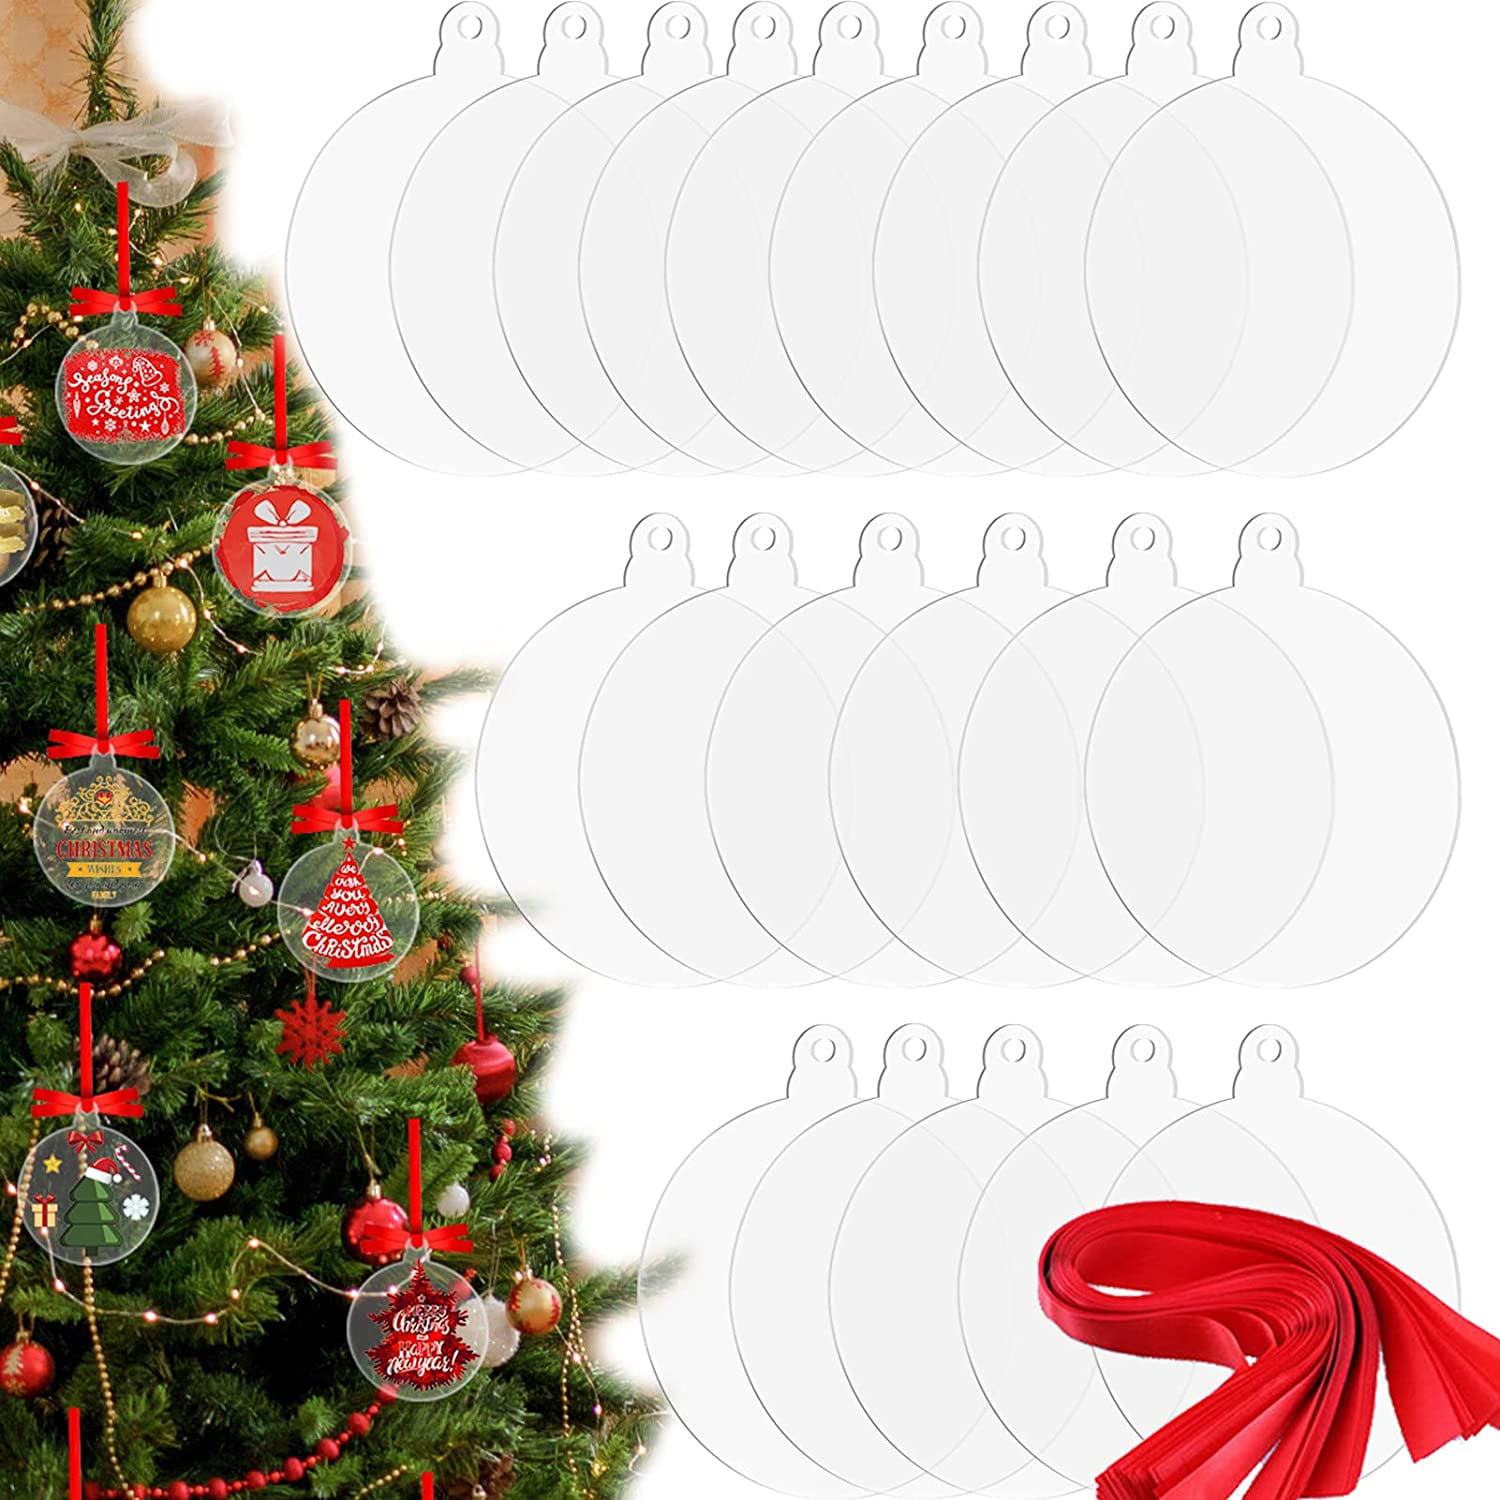 20x Clear Acrylic Round Disc Flat Ornament Blanks for DIY Crafts 1.5